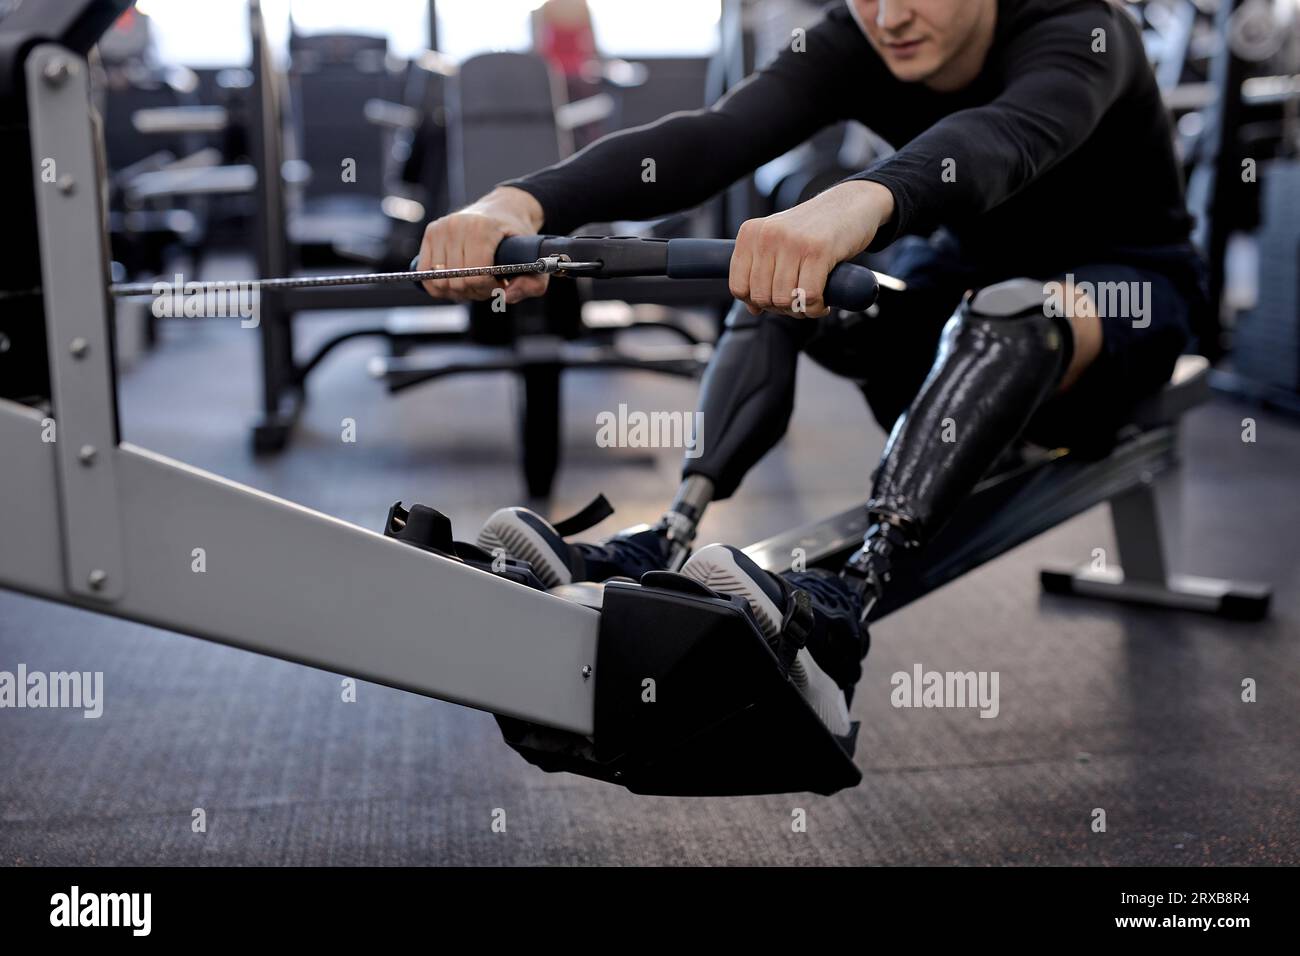 disabled person uses a rowing machine at sport center, cropped shot, focus on artificial legs lifestyle health and body care Stock Photo